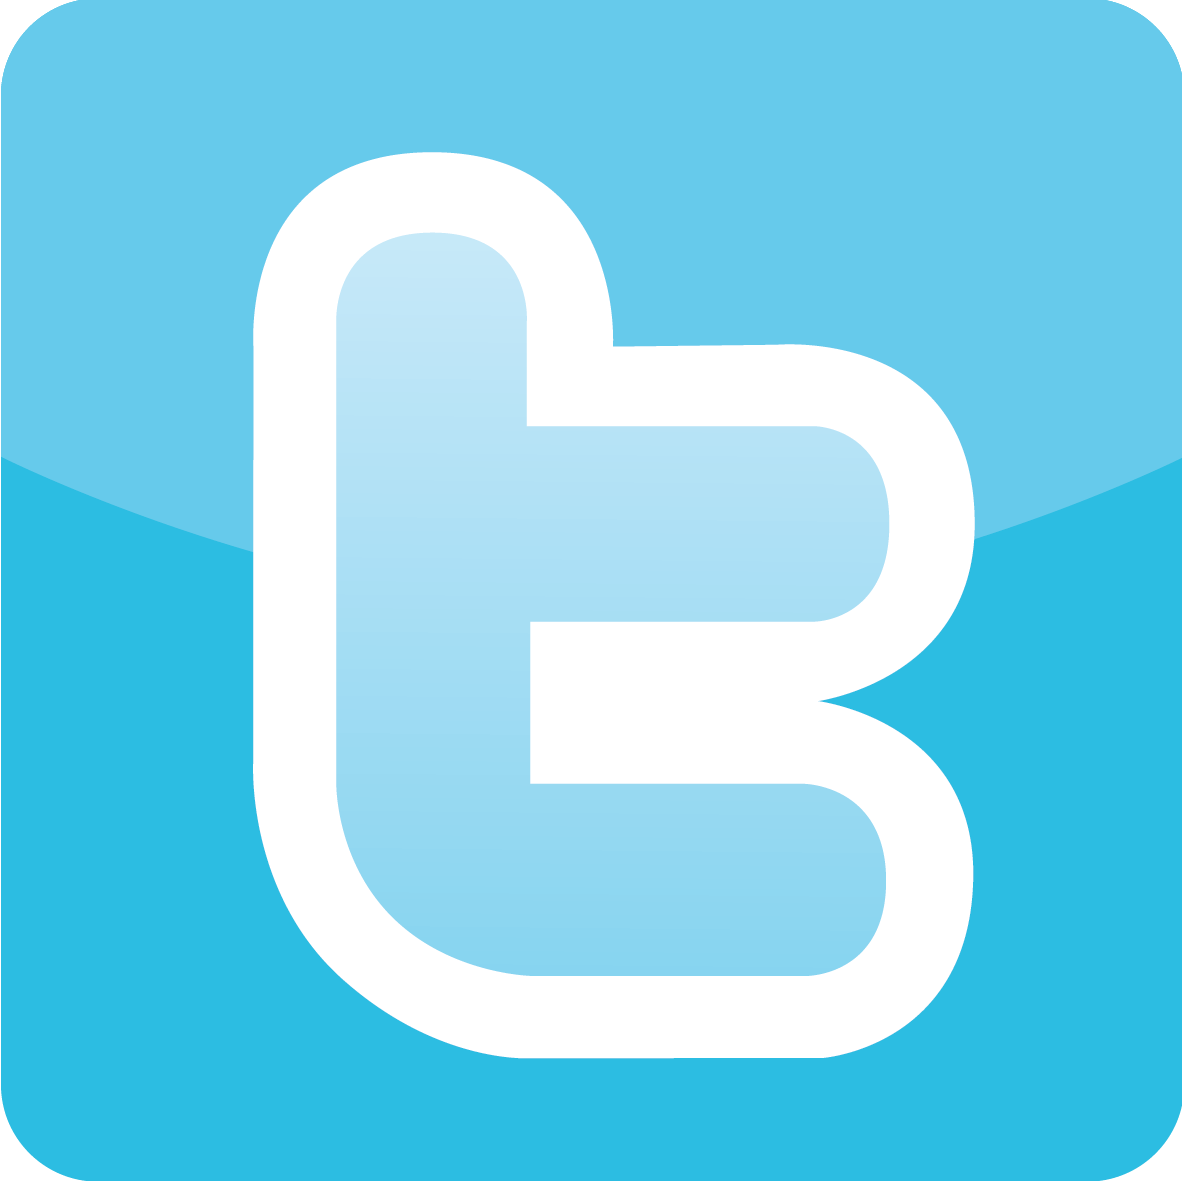 Official Twitter Logo - Twitter logo PNG images free download